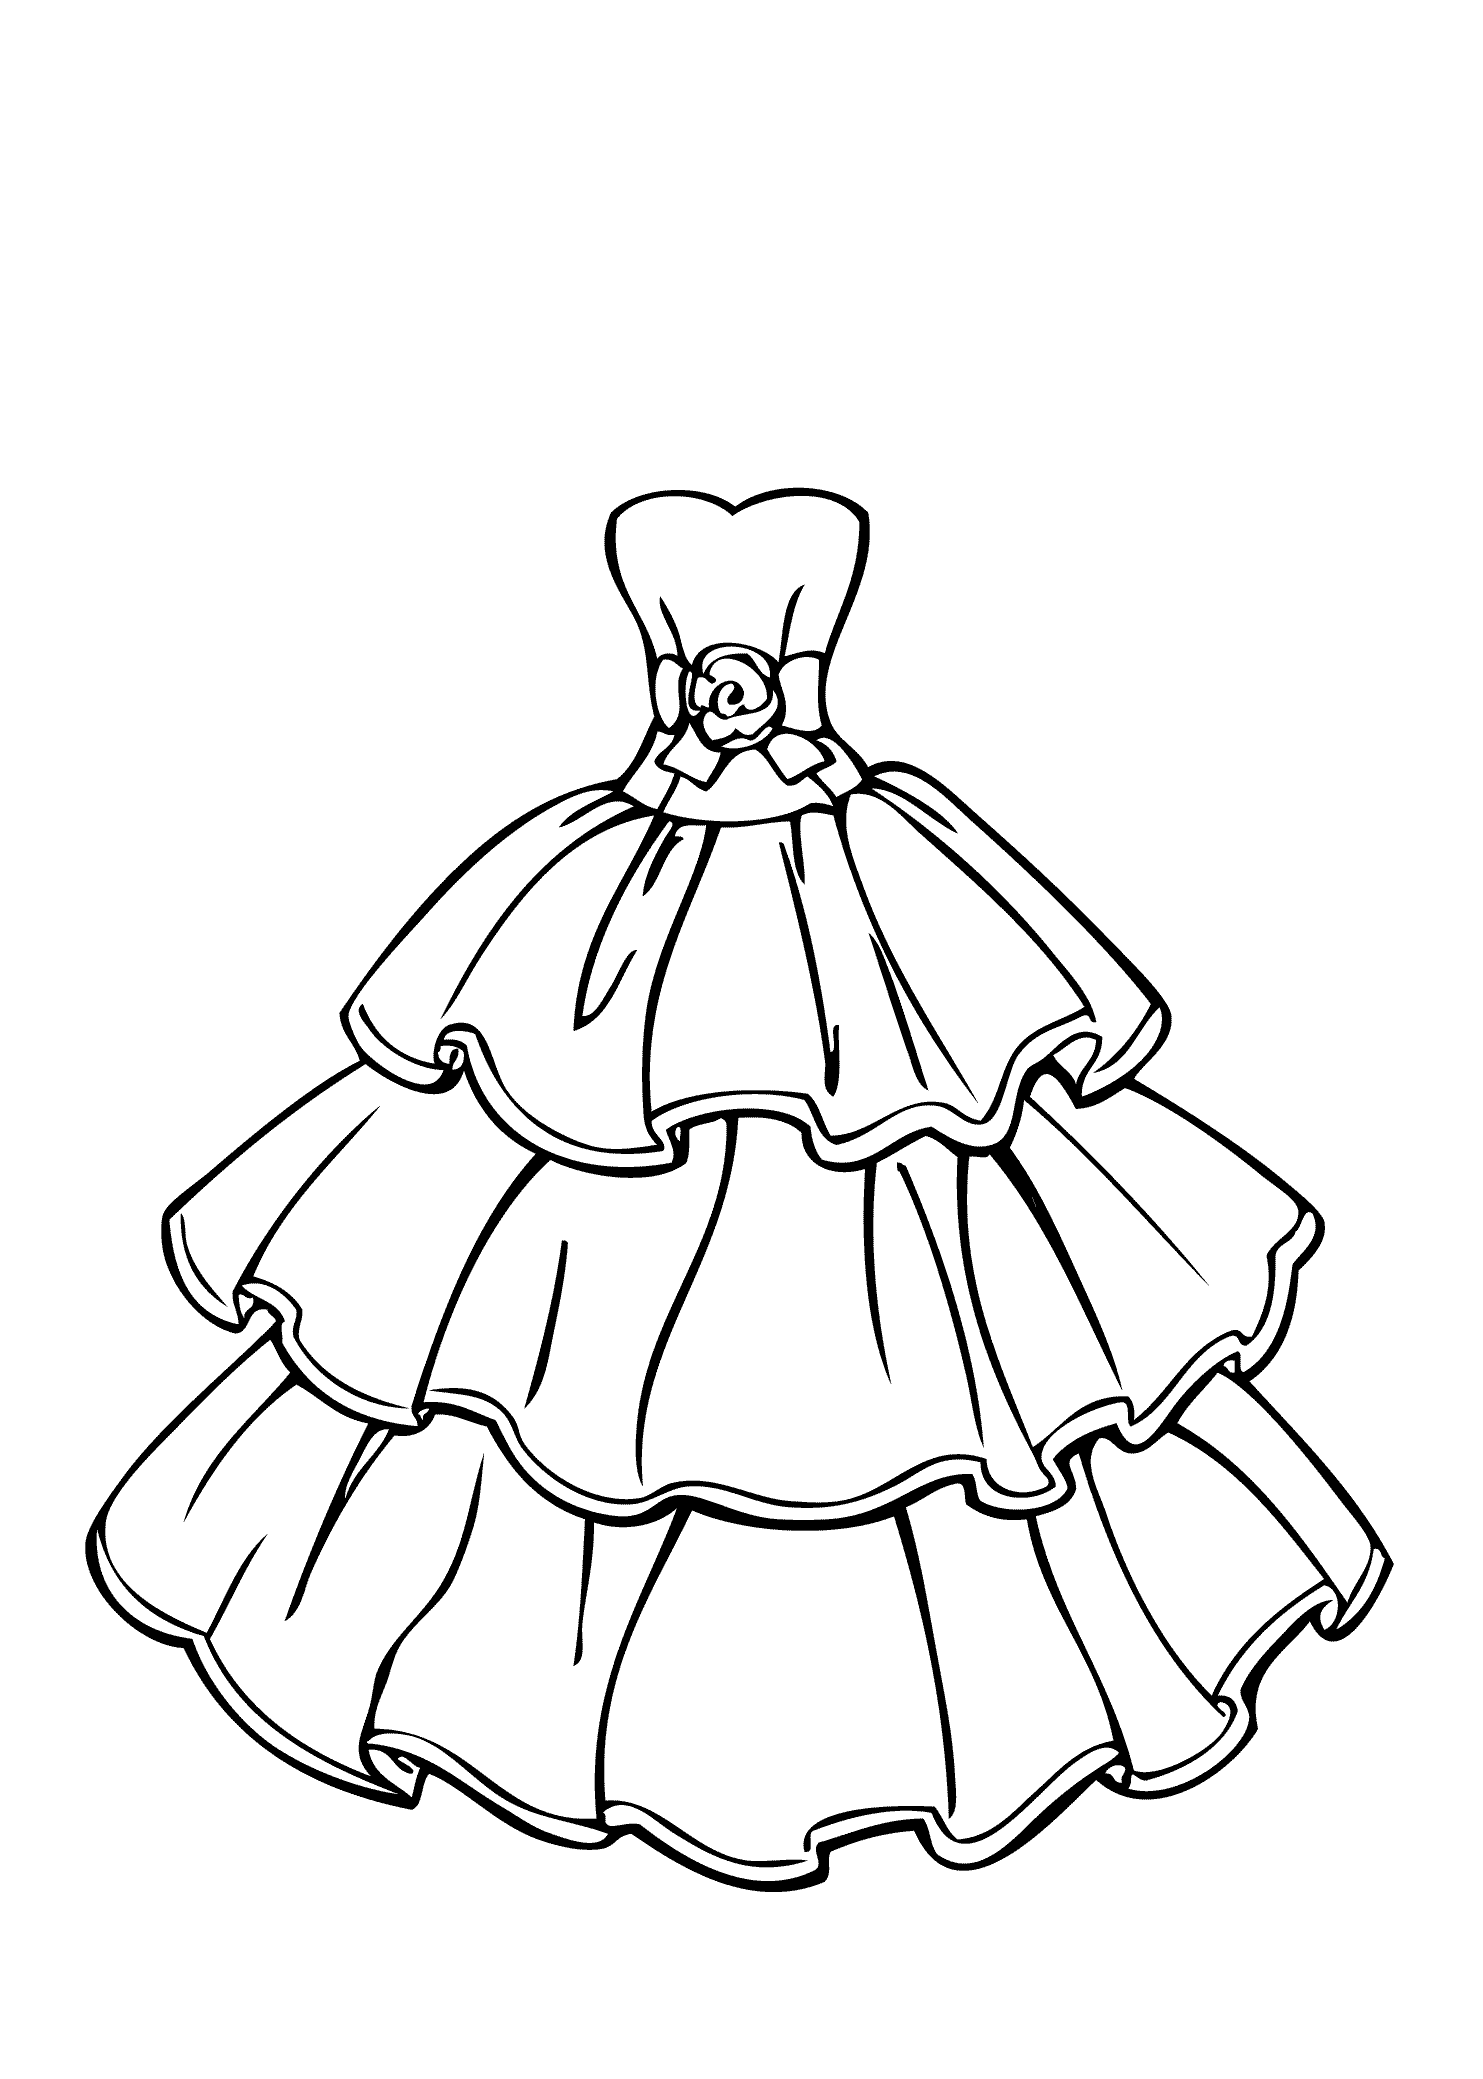 wedding dress coloring pages nw wedding blog custom bridal sketches by lauren pages coloring wedding dress 